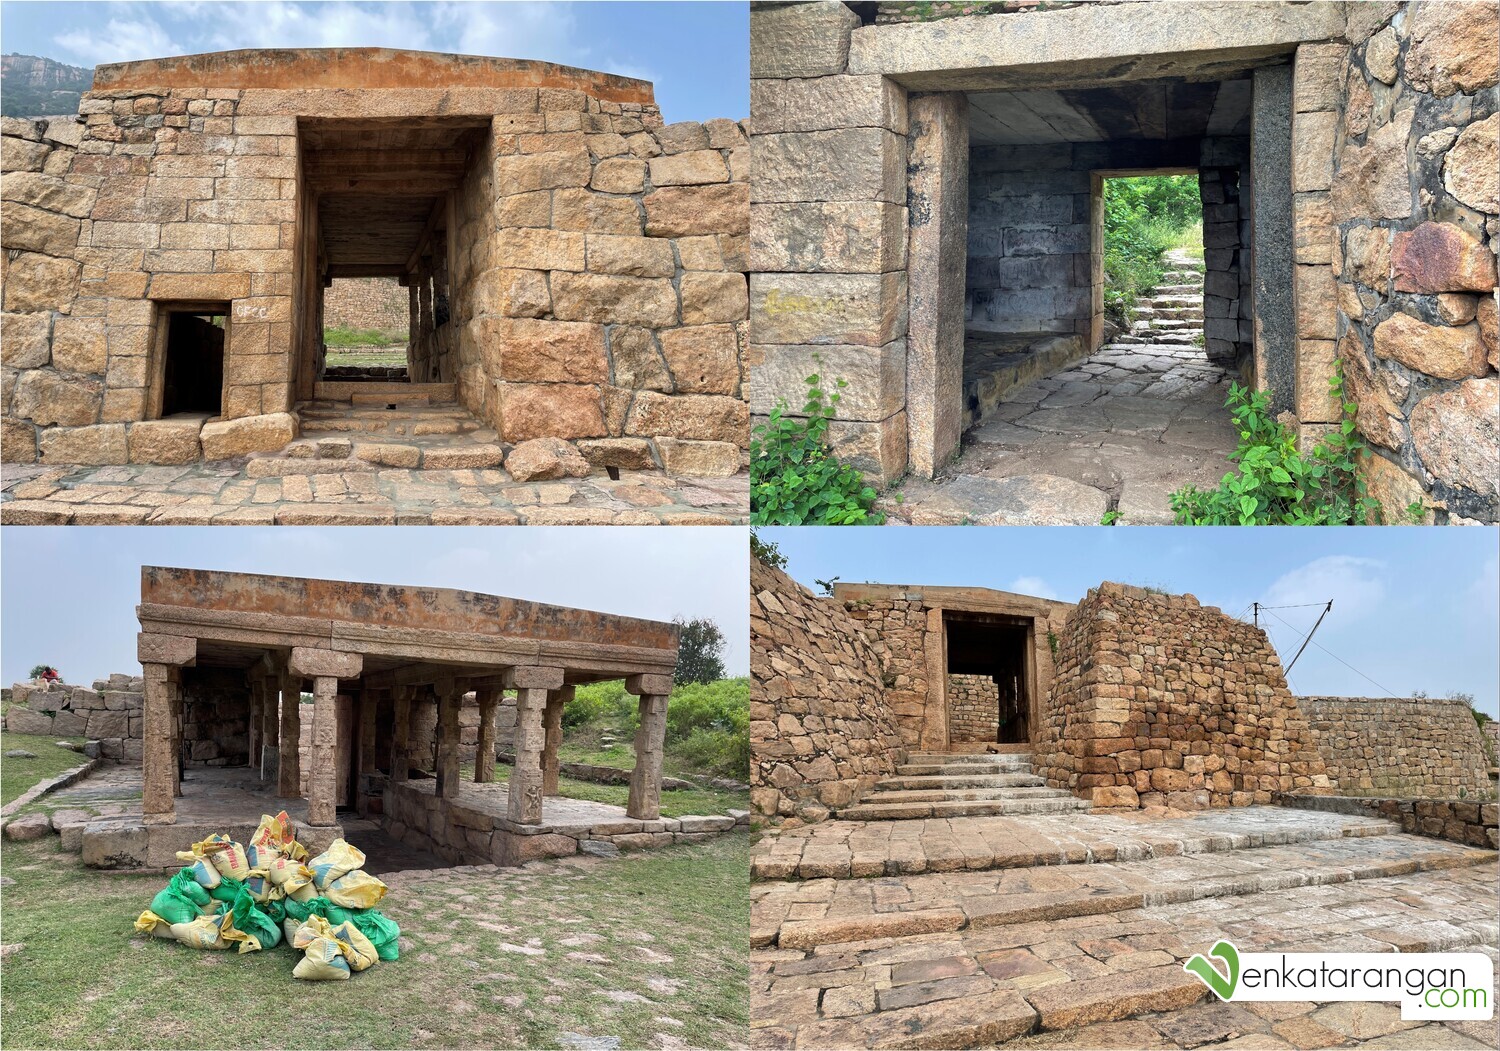 Mandapams (Halls) and shelters like these are found in a few places along the way - I guess they should've been made/restored in later years